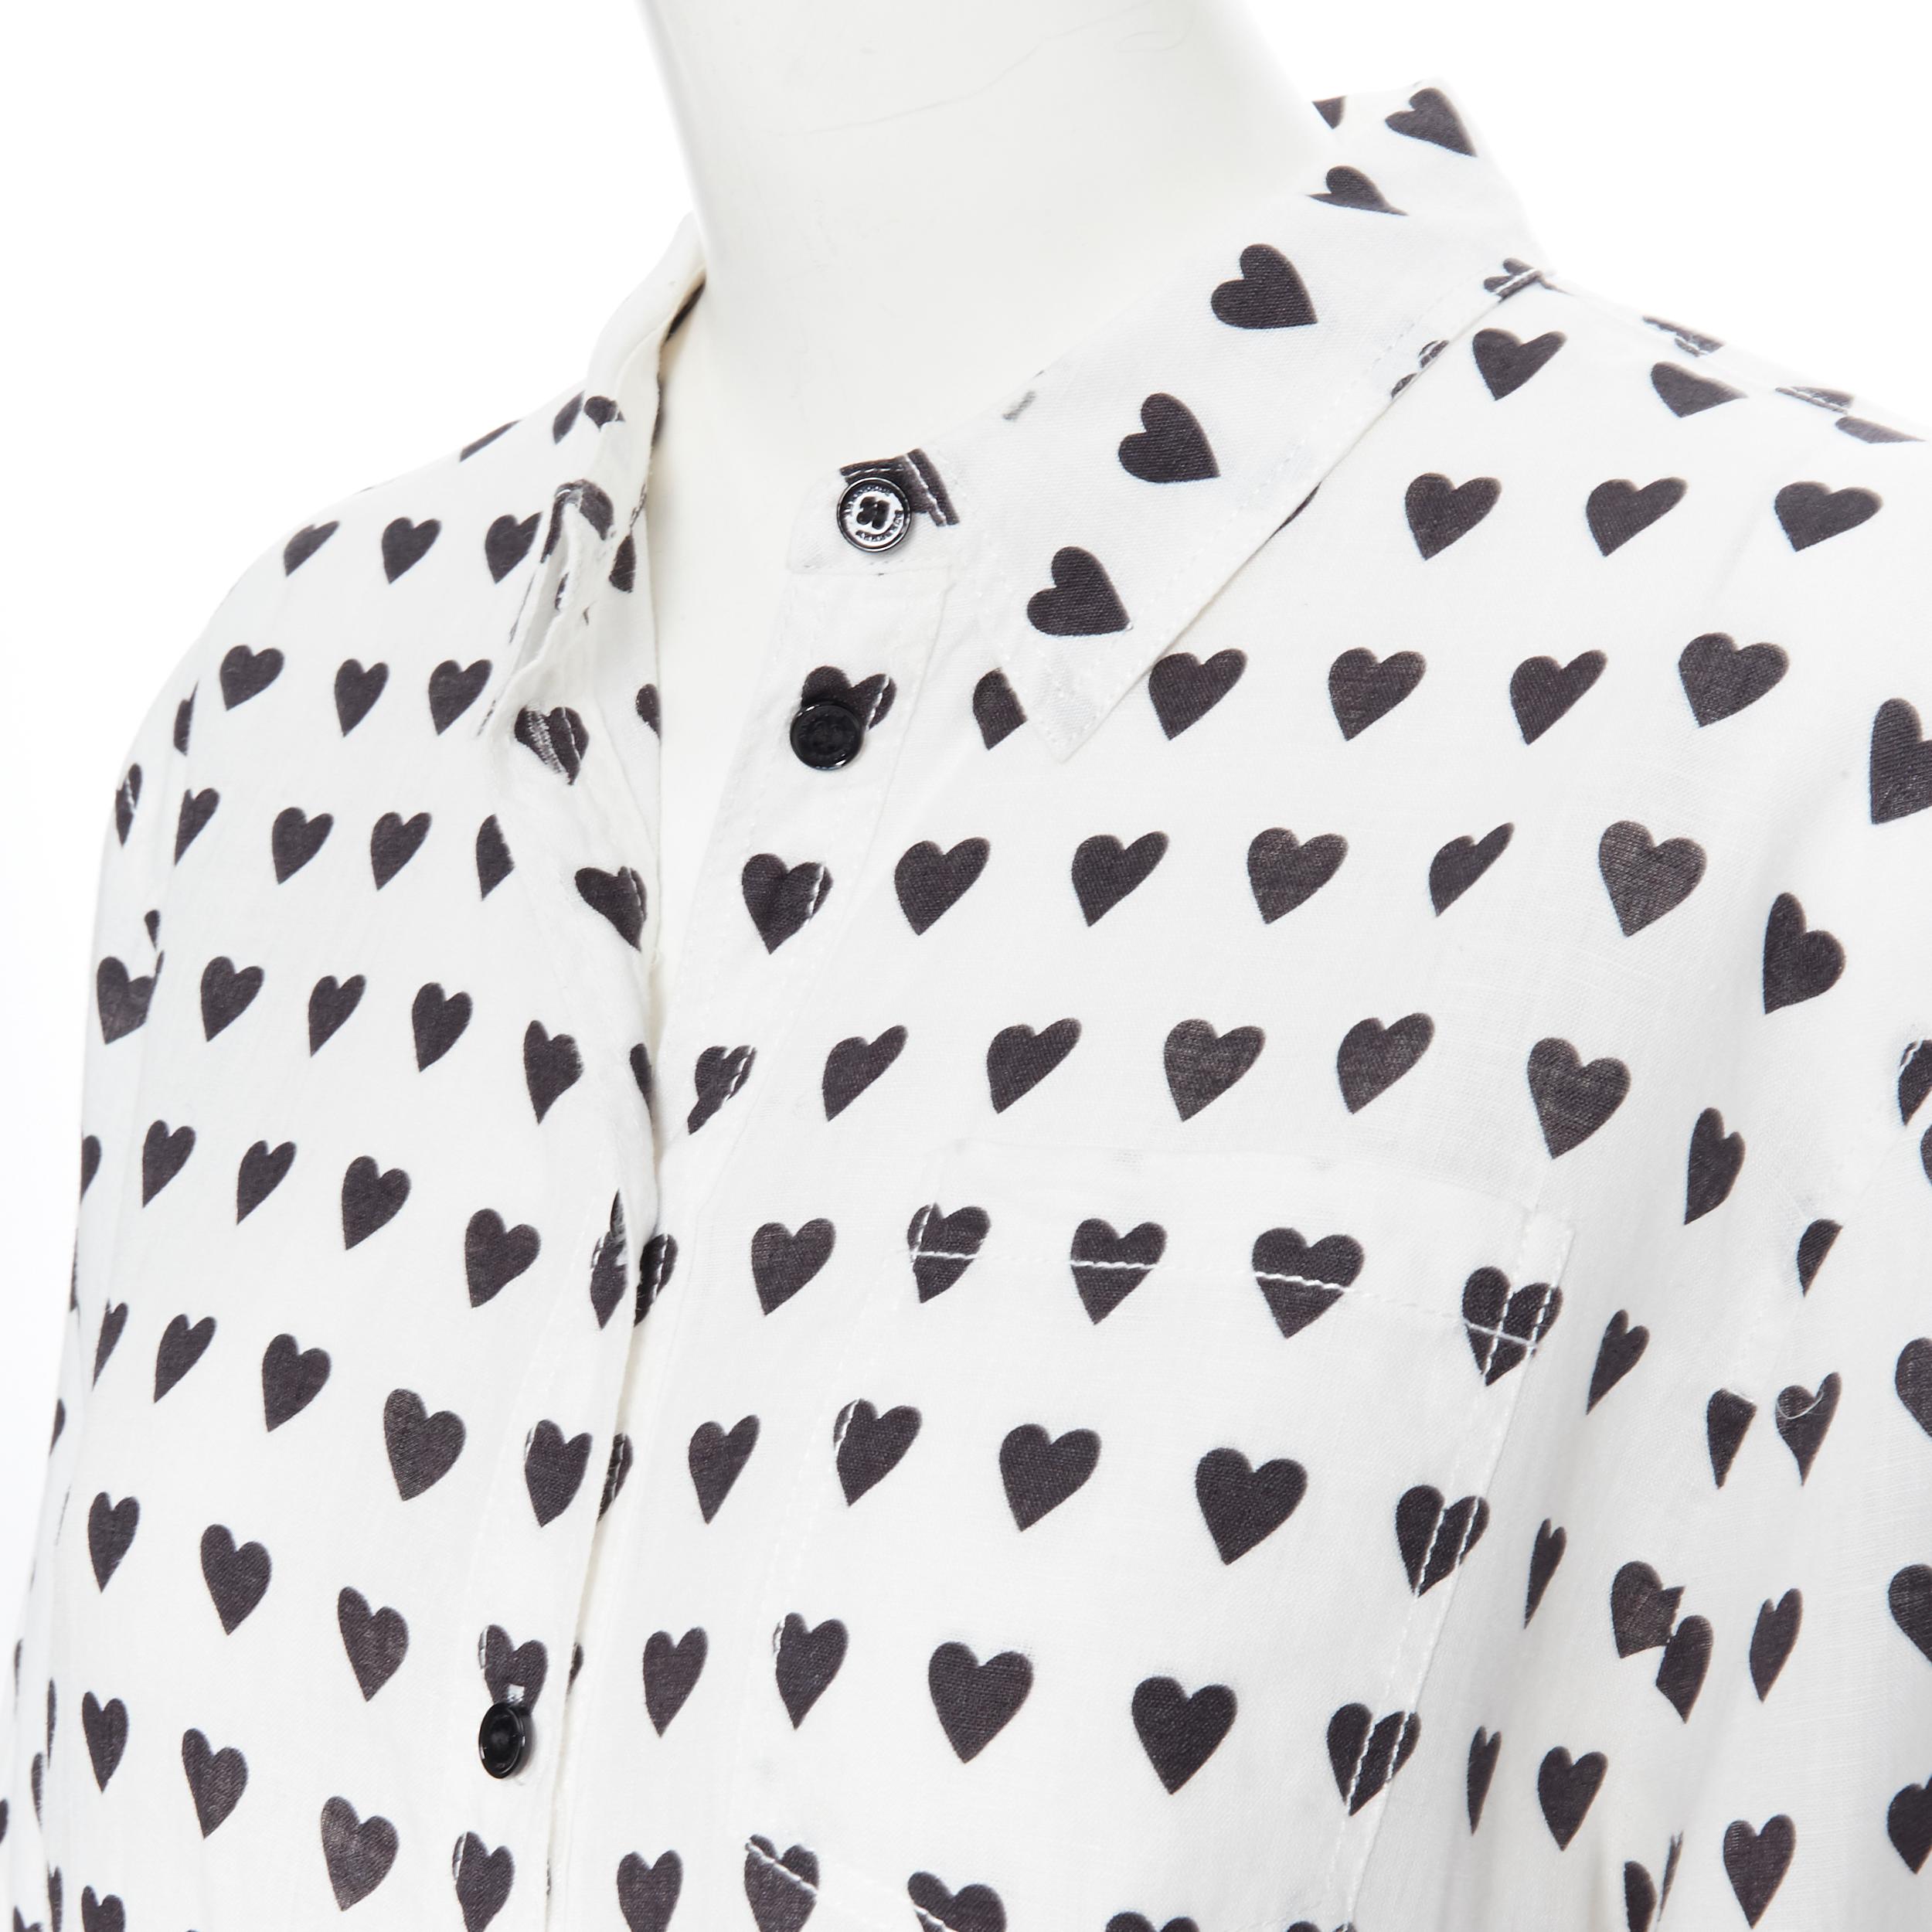 BURBERRY 100% cotton white black heart print regulat fit casual shirt L
Brand: Burberry
Model Name / Style: Heart print shirt
Material: Cotton
Color: White
Pattern: Other; heart print
Closure: Button
Extra Detail: Heart print. Patch breast